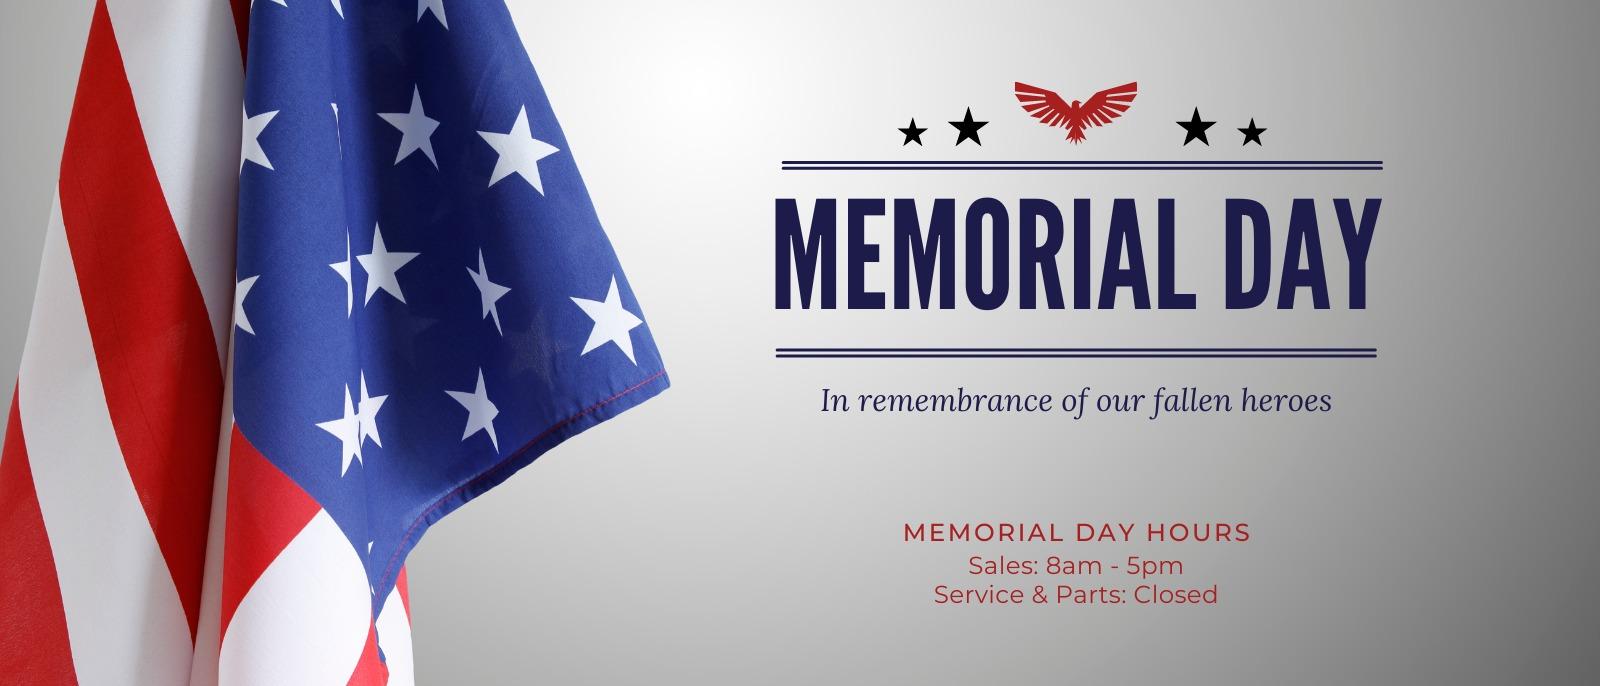 Memorial Day
In remembrance of our fallen heroes
Memorial Day Hours
Sales: 8a - 5p
Service & Parts: Closed